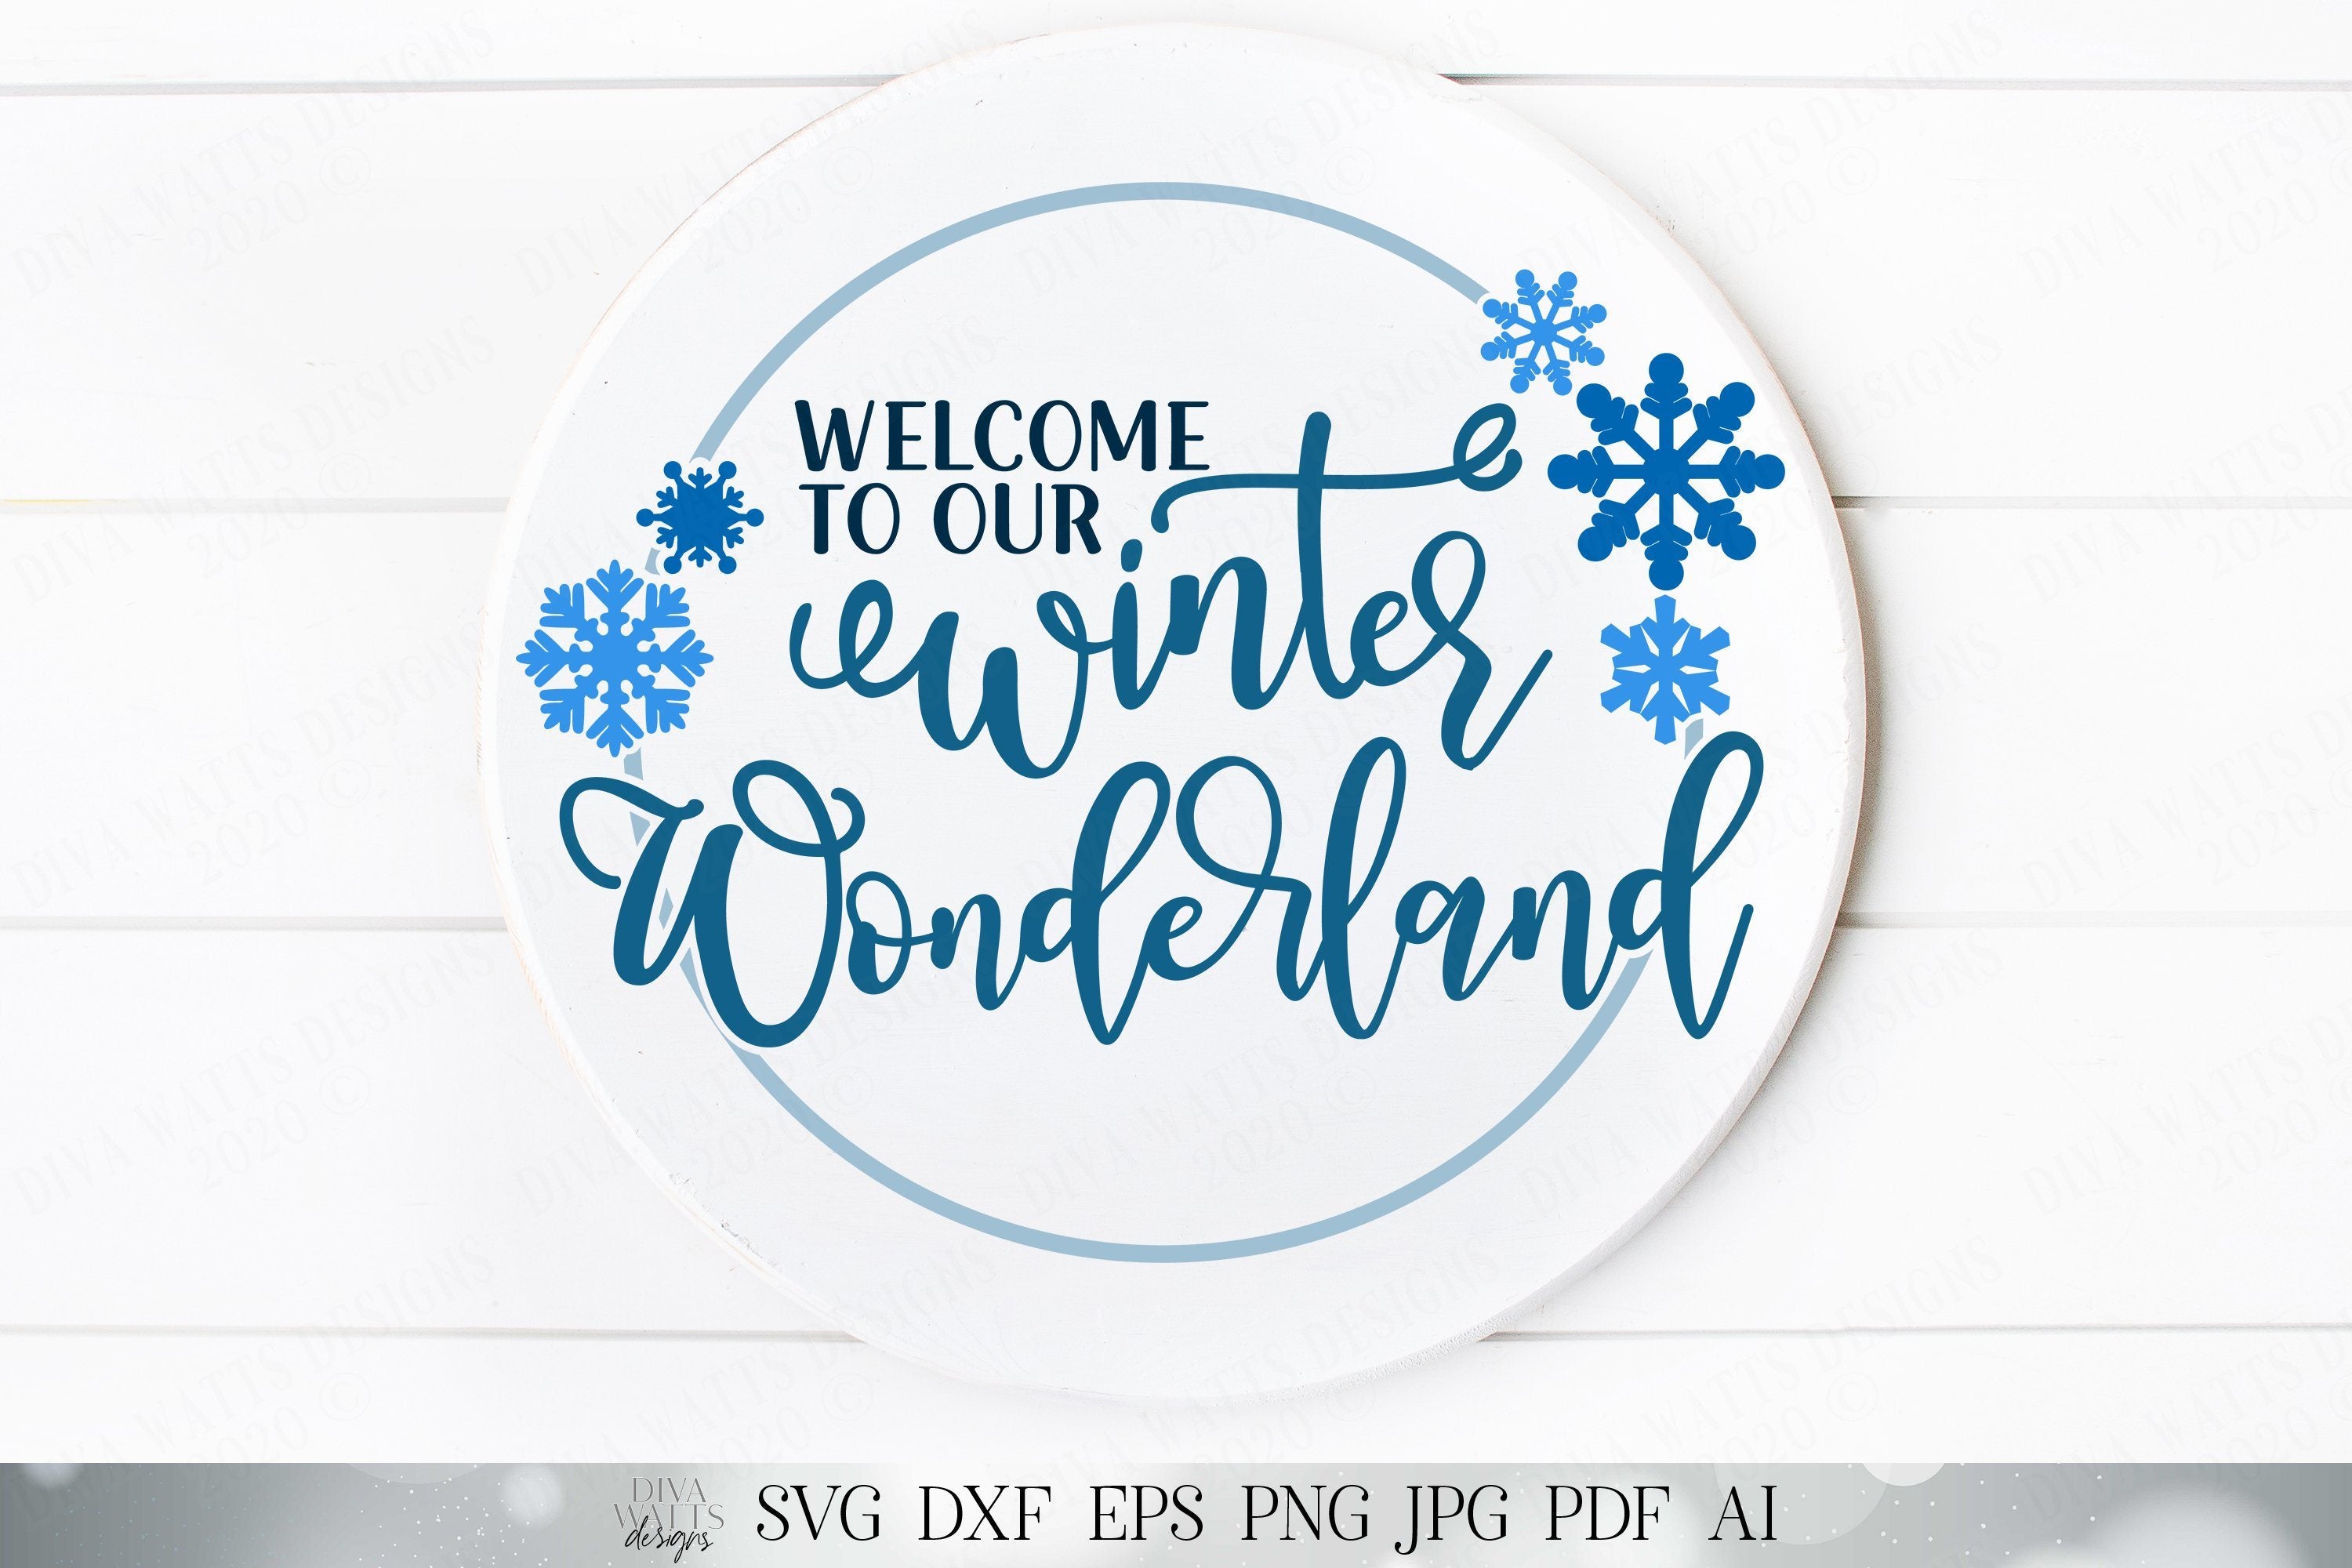 Download Christmas Svg Snowman Svg Holiday Saying Winter Svg Snow Svg Jpg Dxf Png Cut File Clipart Winter Wonderland Svg Christmas Shirt Svg Clip Art Art Collectibles Delage Com Br